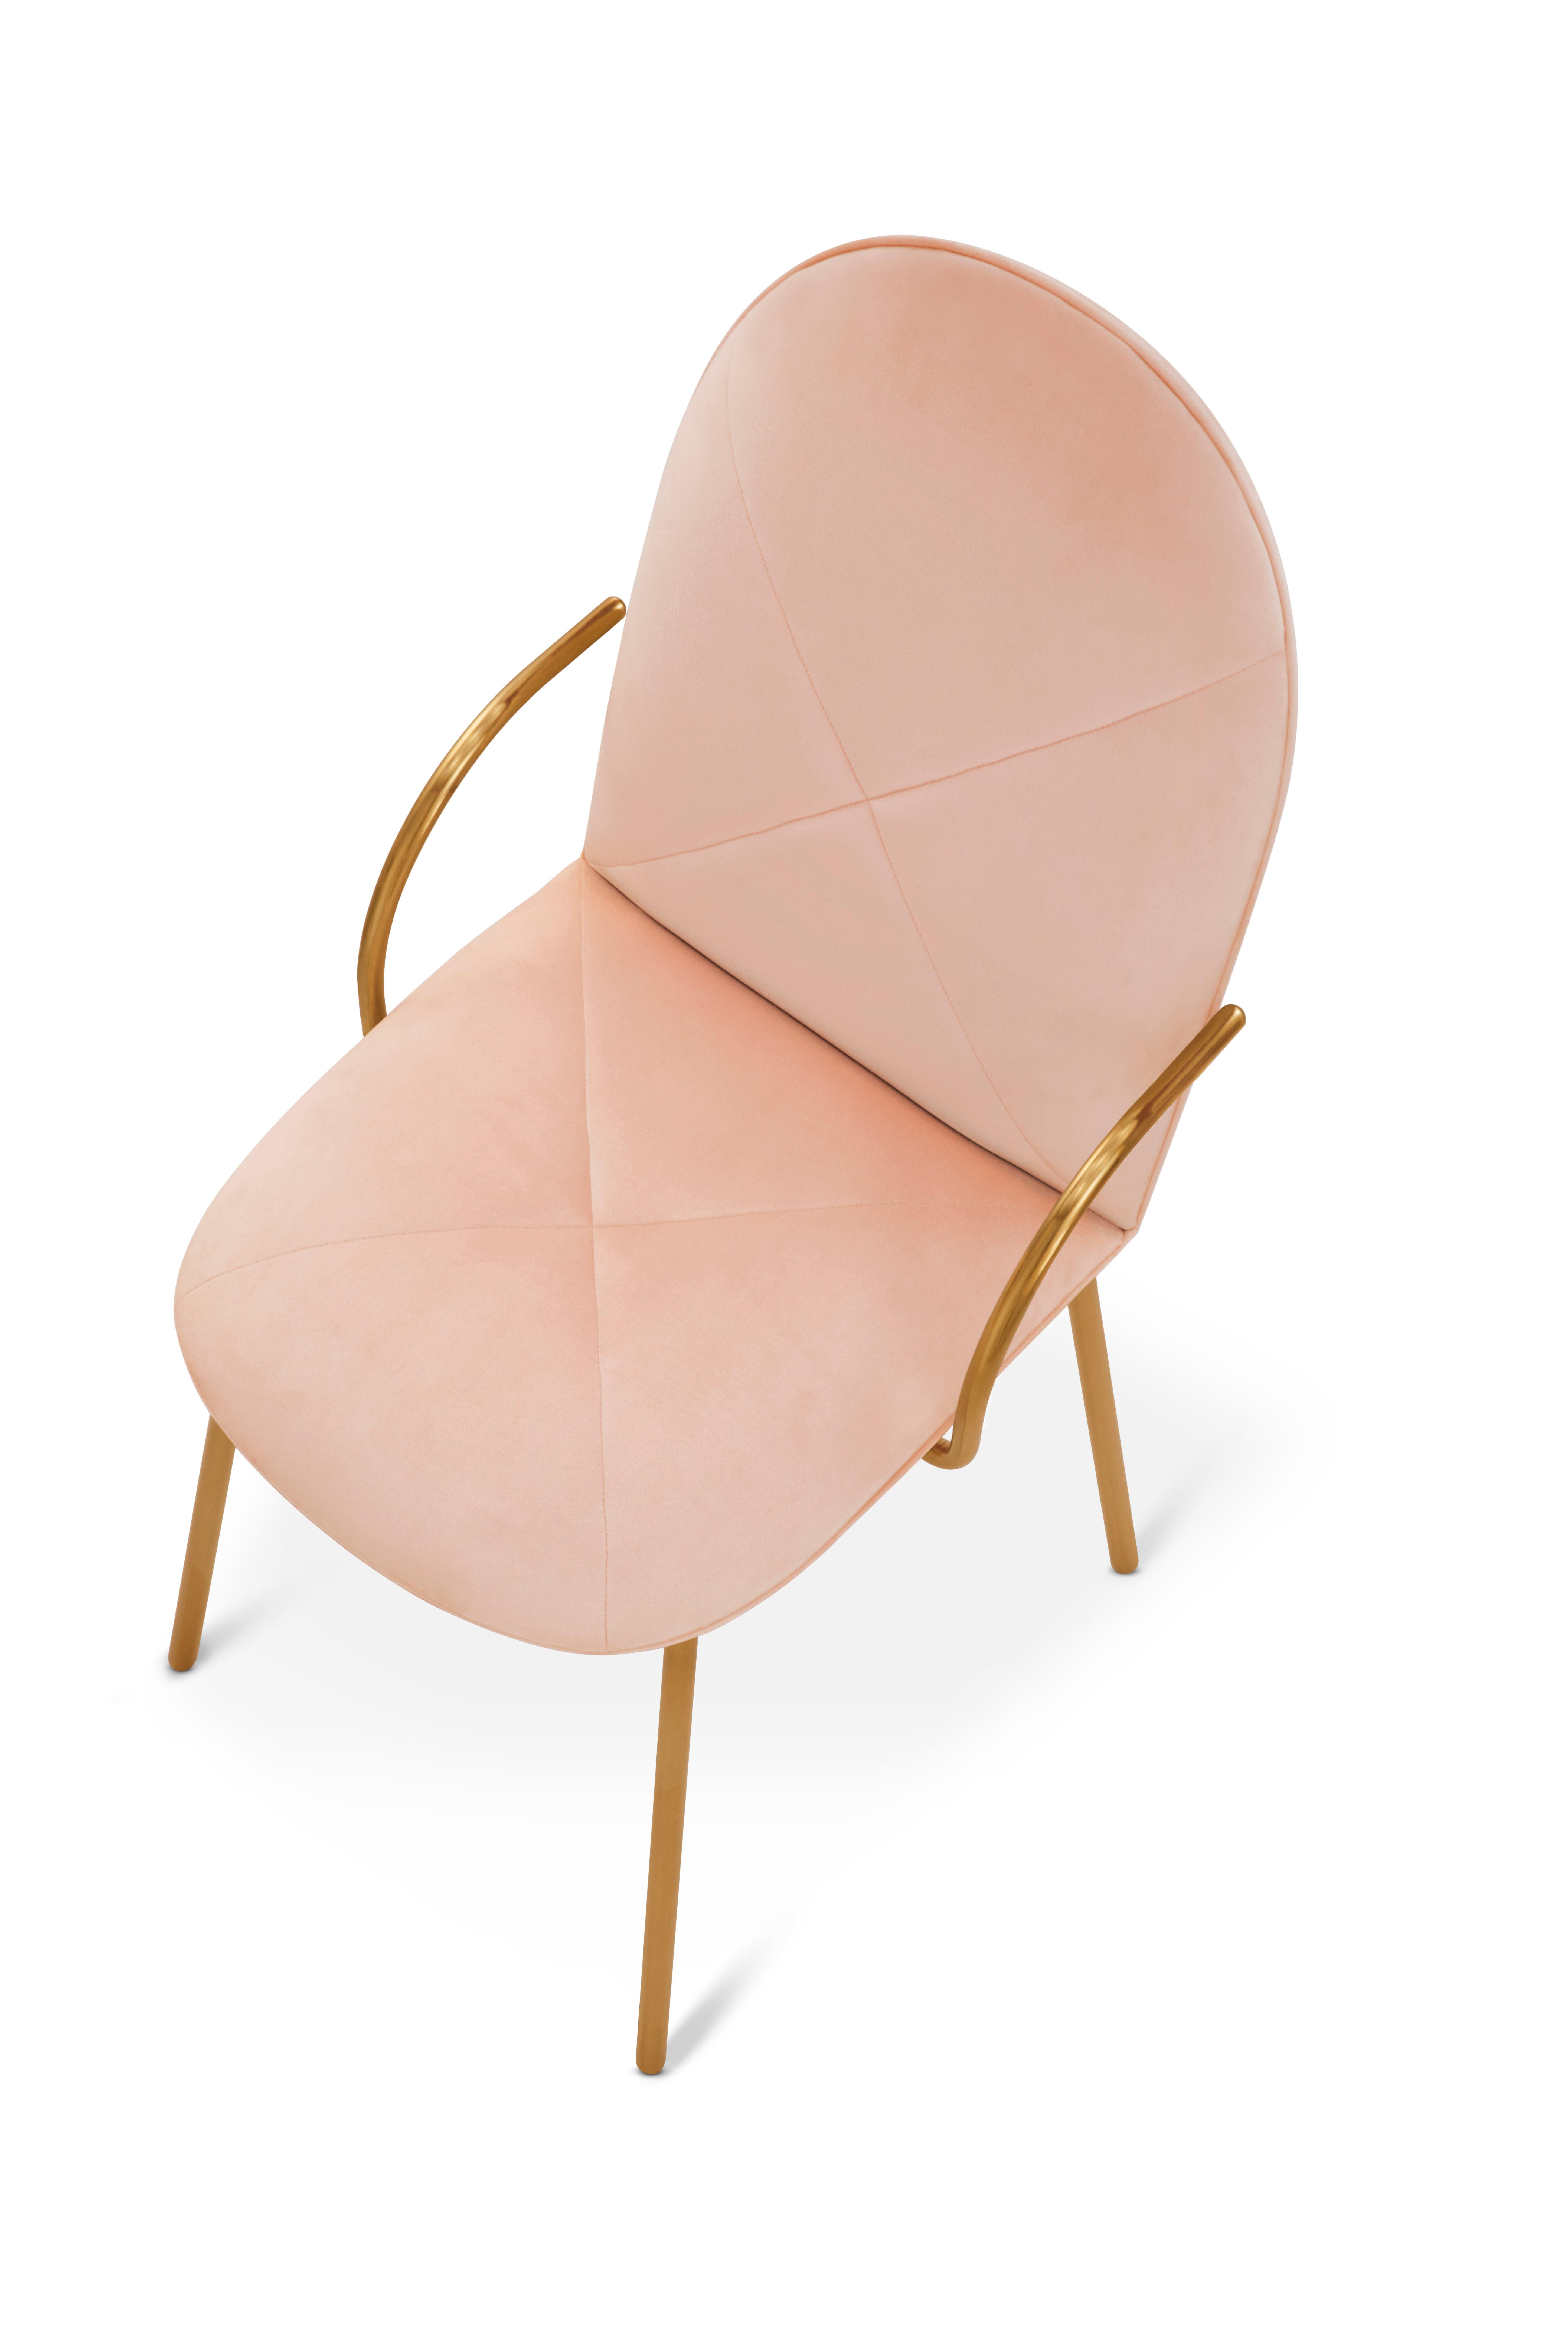 Modern Orion Dining Chair with Plush Pink Velvet and Gold Arms by Nika Zupanc For Sale